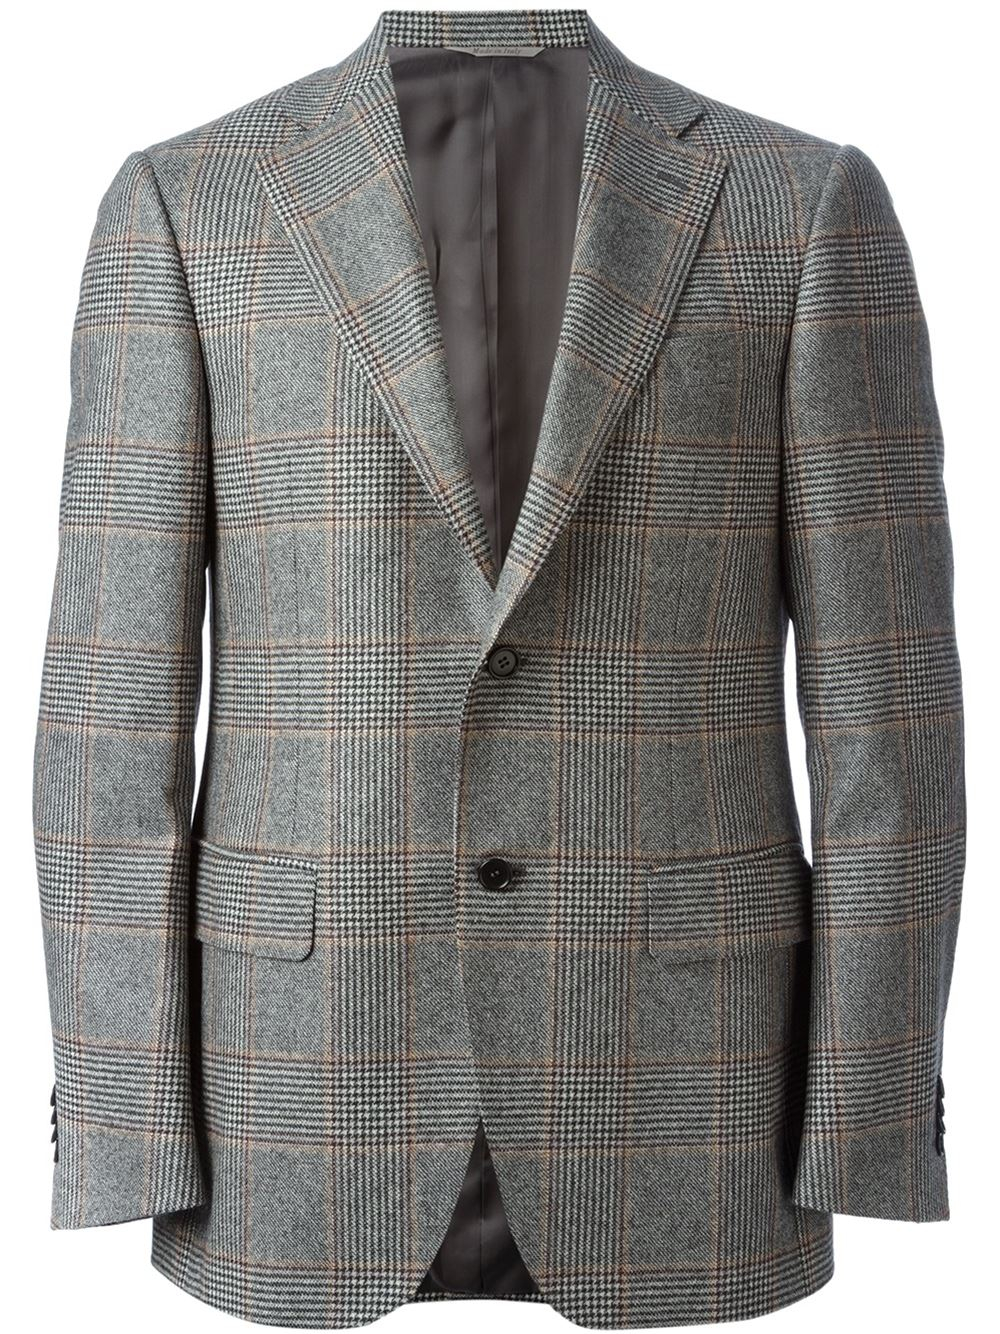 Canali Prince Of Wales Check Blazer in Brown (Grey) for Men - Lyst